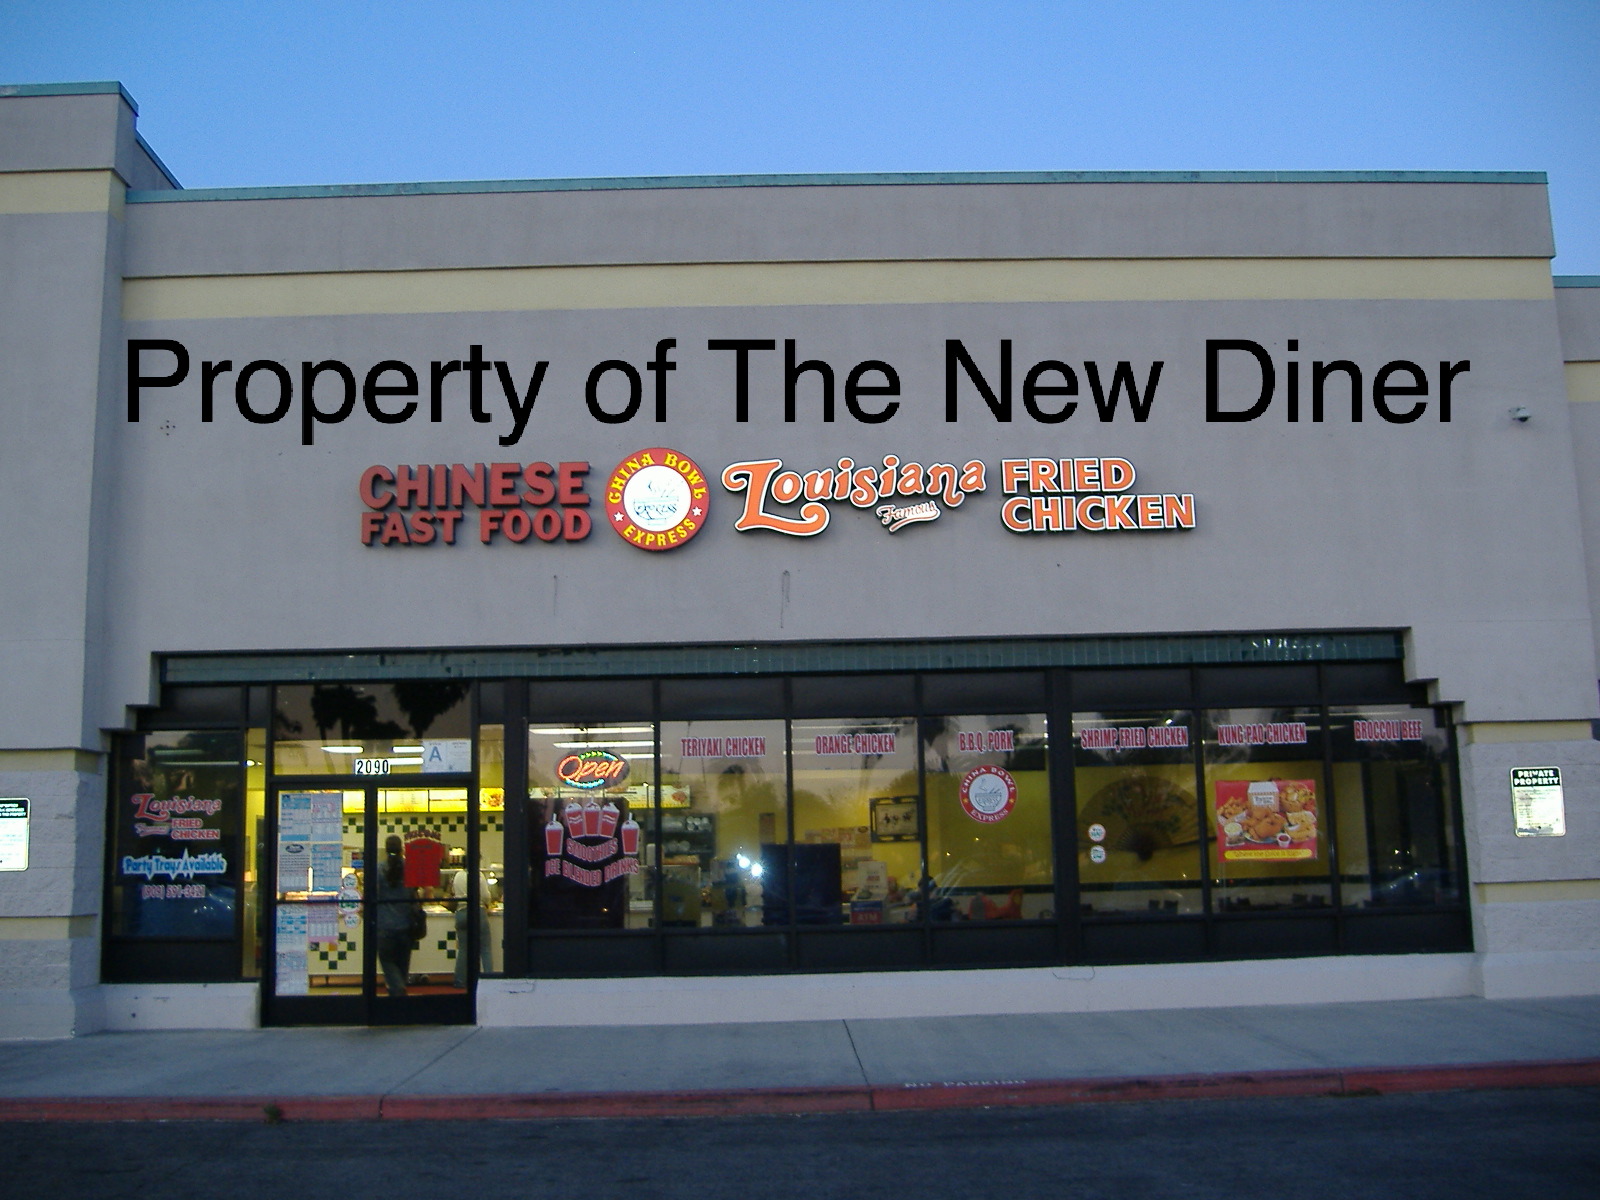 The New Diner: China Bowl Express & Louisiana Fried Chicken